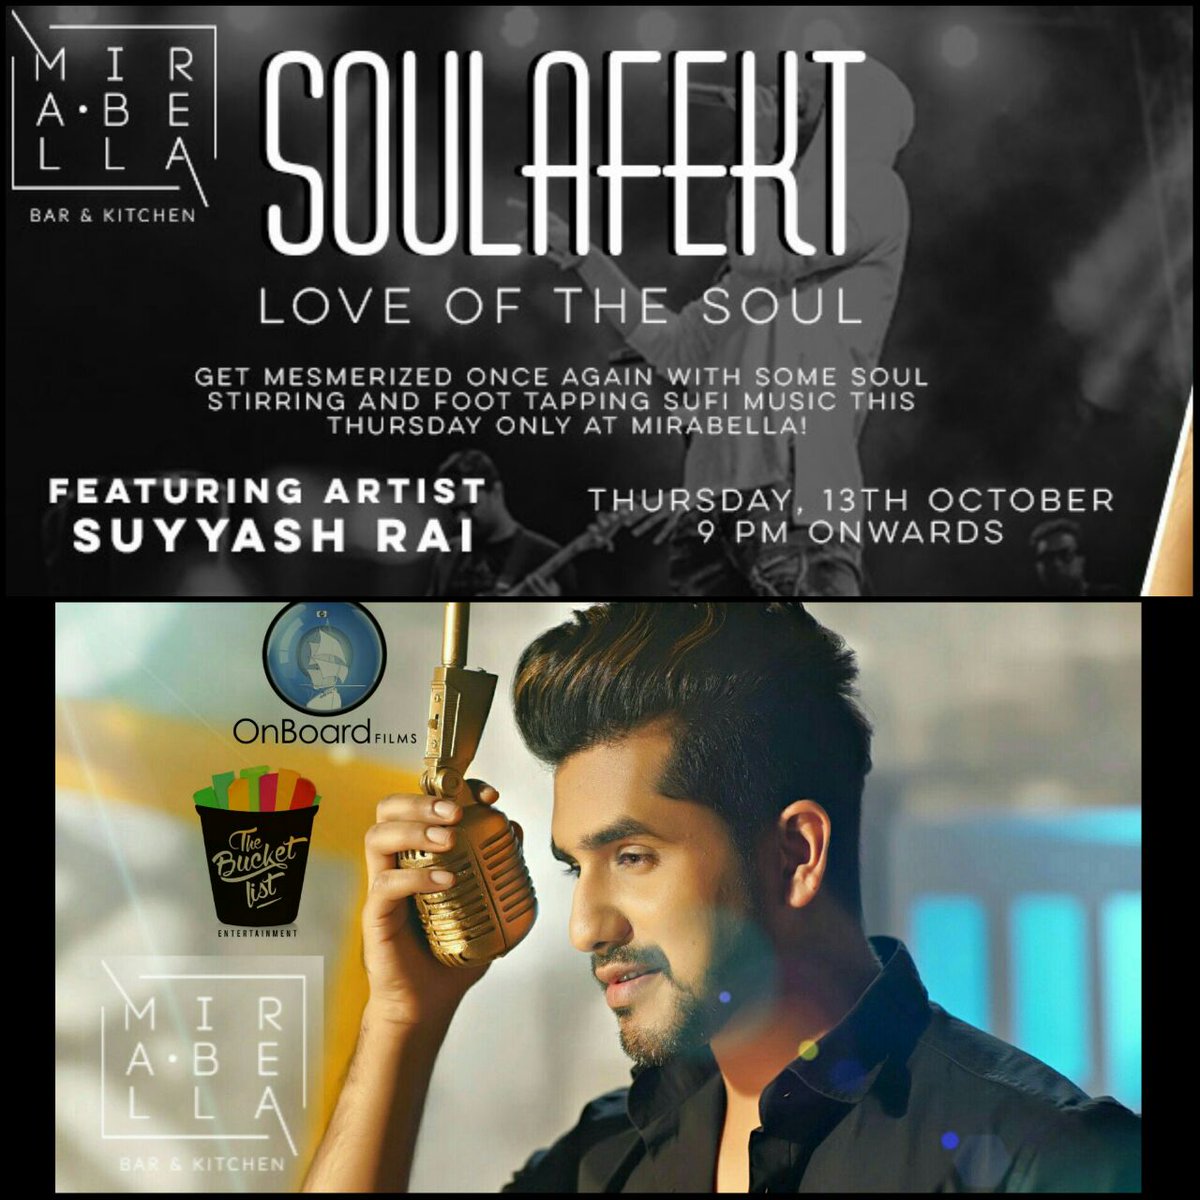 All roads lead to #mirabella tonite coz my baby @suyyashrai Is performing .. #sufinight #livesinging #gonnabeepic #seeuthere  !!!